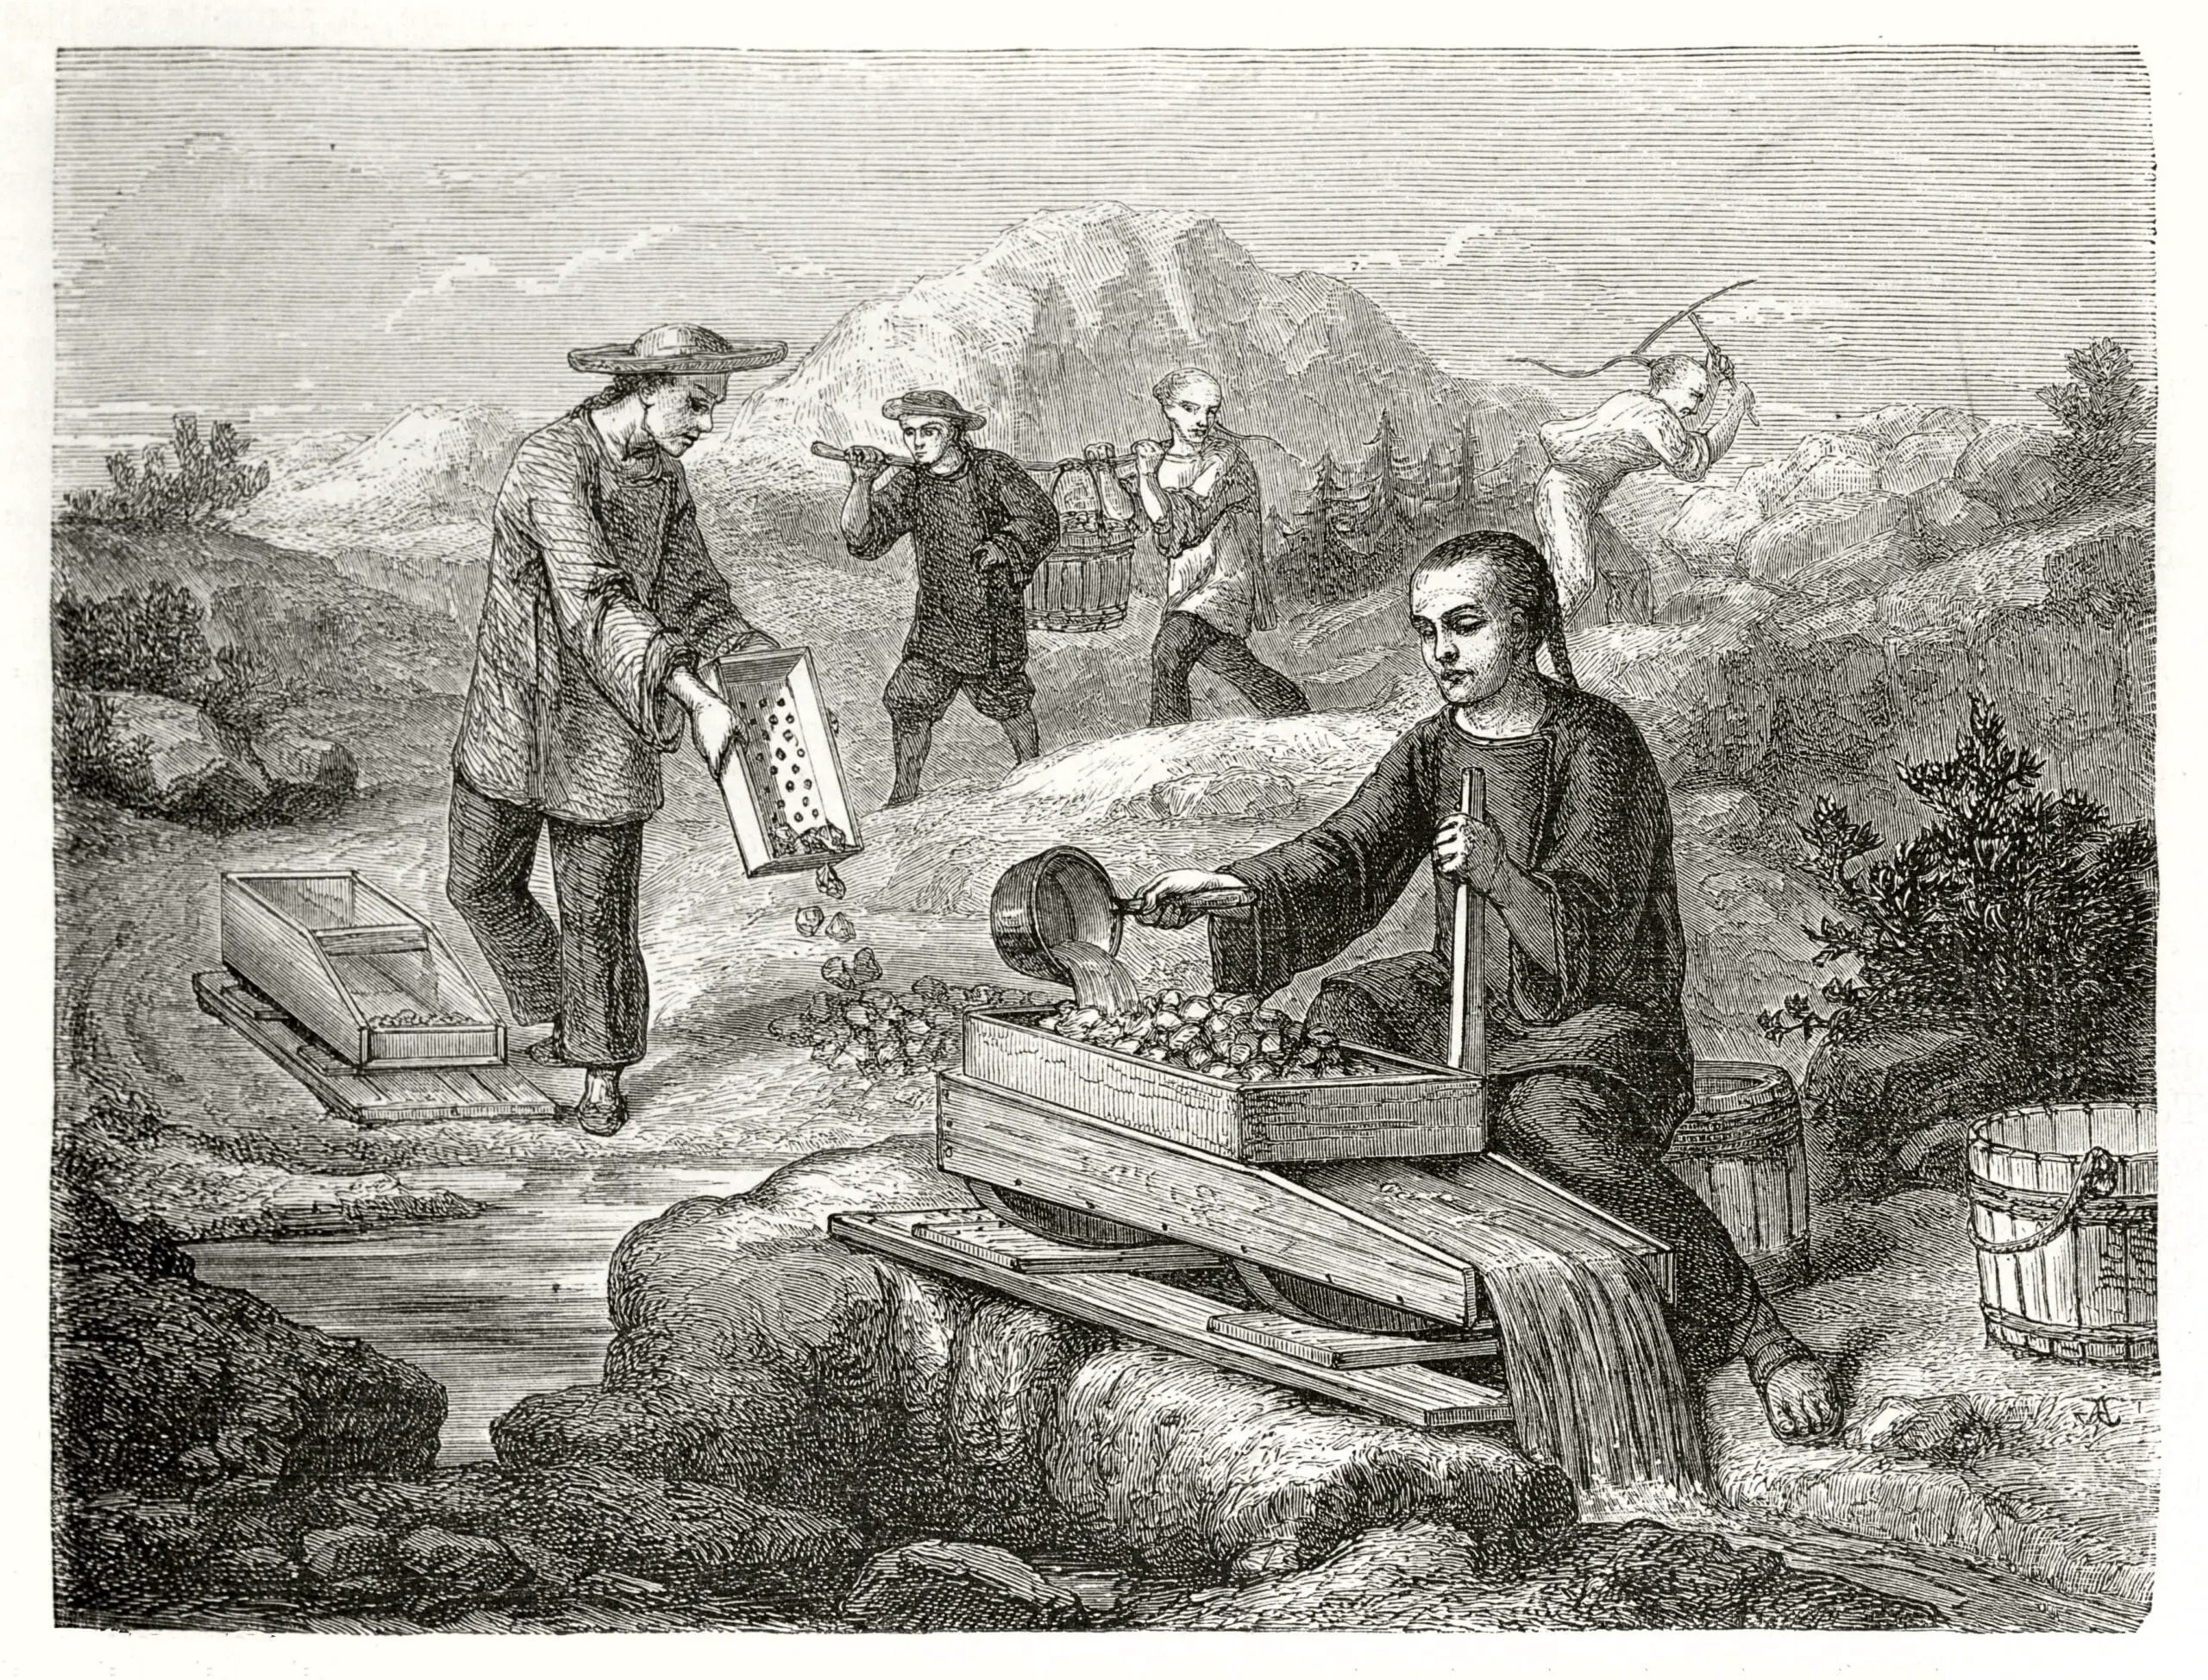 Old illustration of Chinese miners in California washing gold-bearing sand. Created by Chassevent after previous engraving by unknown author, published on Le Tour du Monde, Paris, 1862